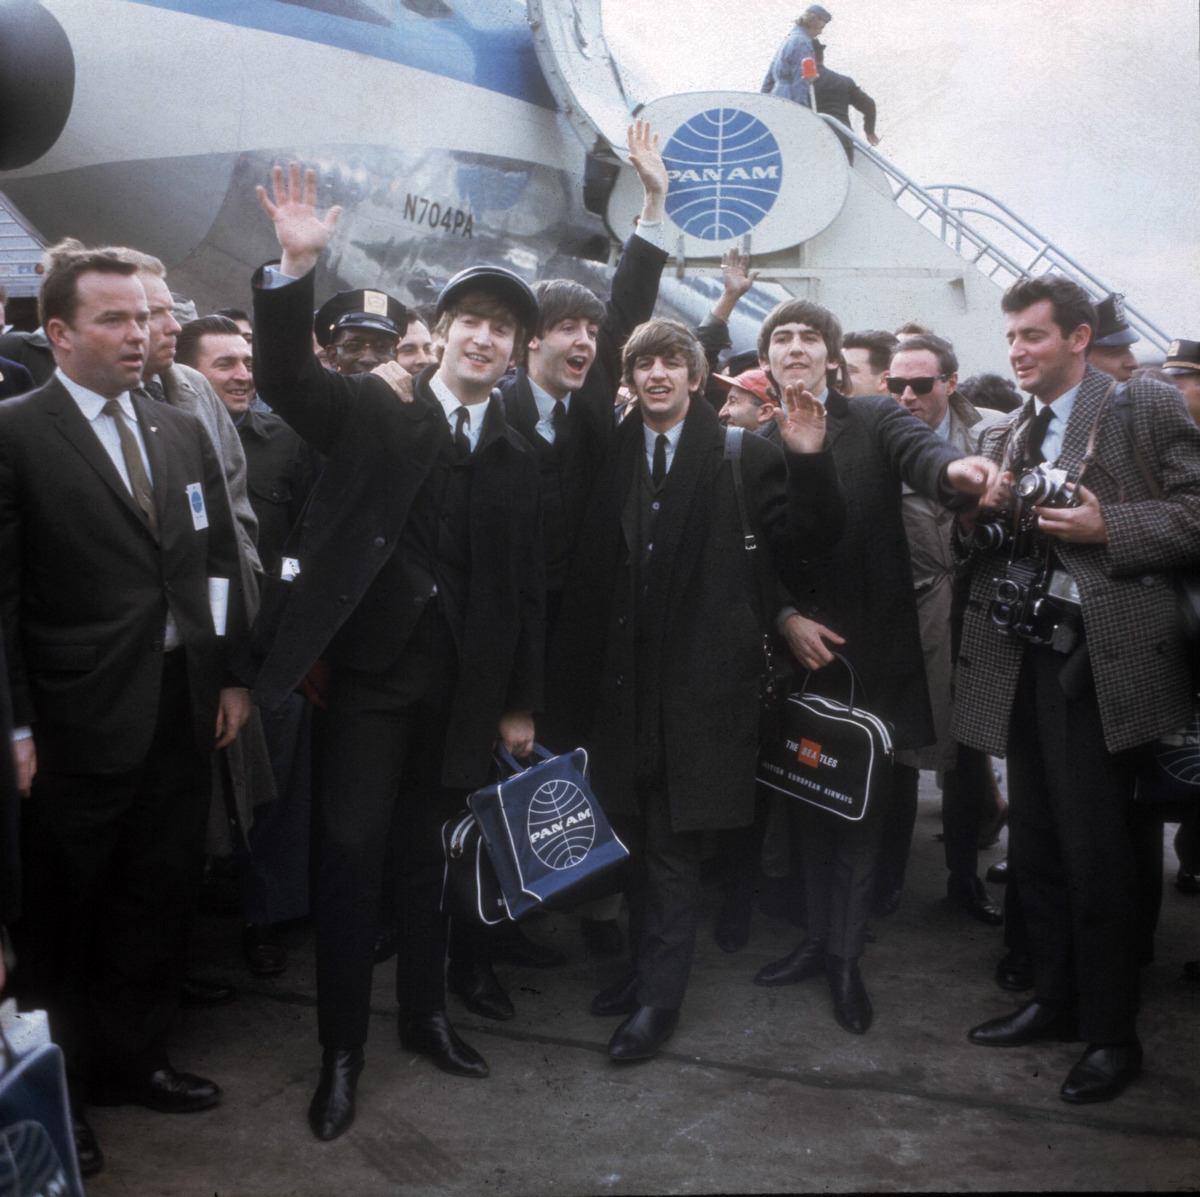 The Beatles arrive at New York's Kennedy Airport Feb. 7, 1964 for their first U.S. appearance. From left are: John Lennon, Paul McCartney, Ringo Starr and George Harrison. Just after 1 p.m. on Feb. 7, 1964, a Pan Am flight from London landed at New York's Idlewild airport. It was carrying a revolution, in the shape of four shaggy-haired musicians from Liverpool. Over the next two weeks The Beatles stormed America, appearing three times on ``The Ed Sullivan Show'' and playing concerts in front of thousands of fervid fans. By the time they flew home, the Fab Four were the most famous band in the world, and the nature of celebrity had changed forever. (AP Photo)